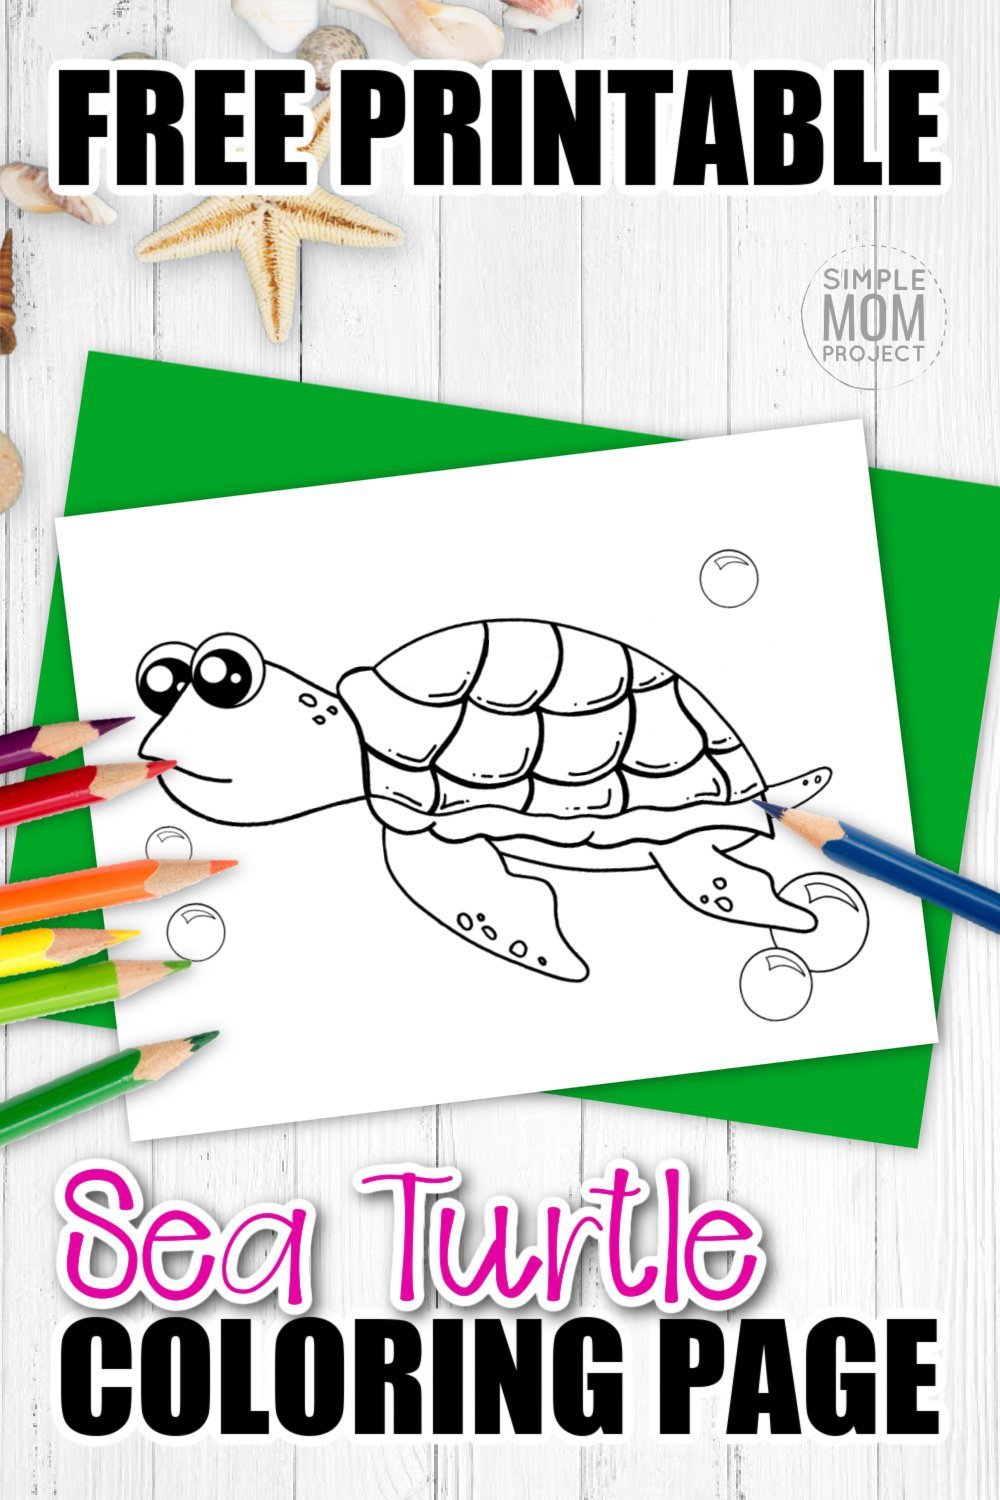 Free printable turtle coloring page â simple mom project